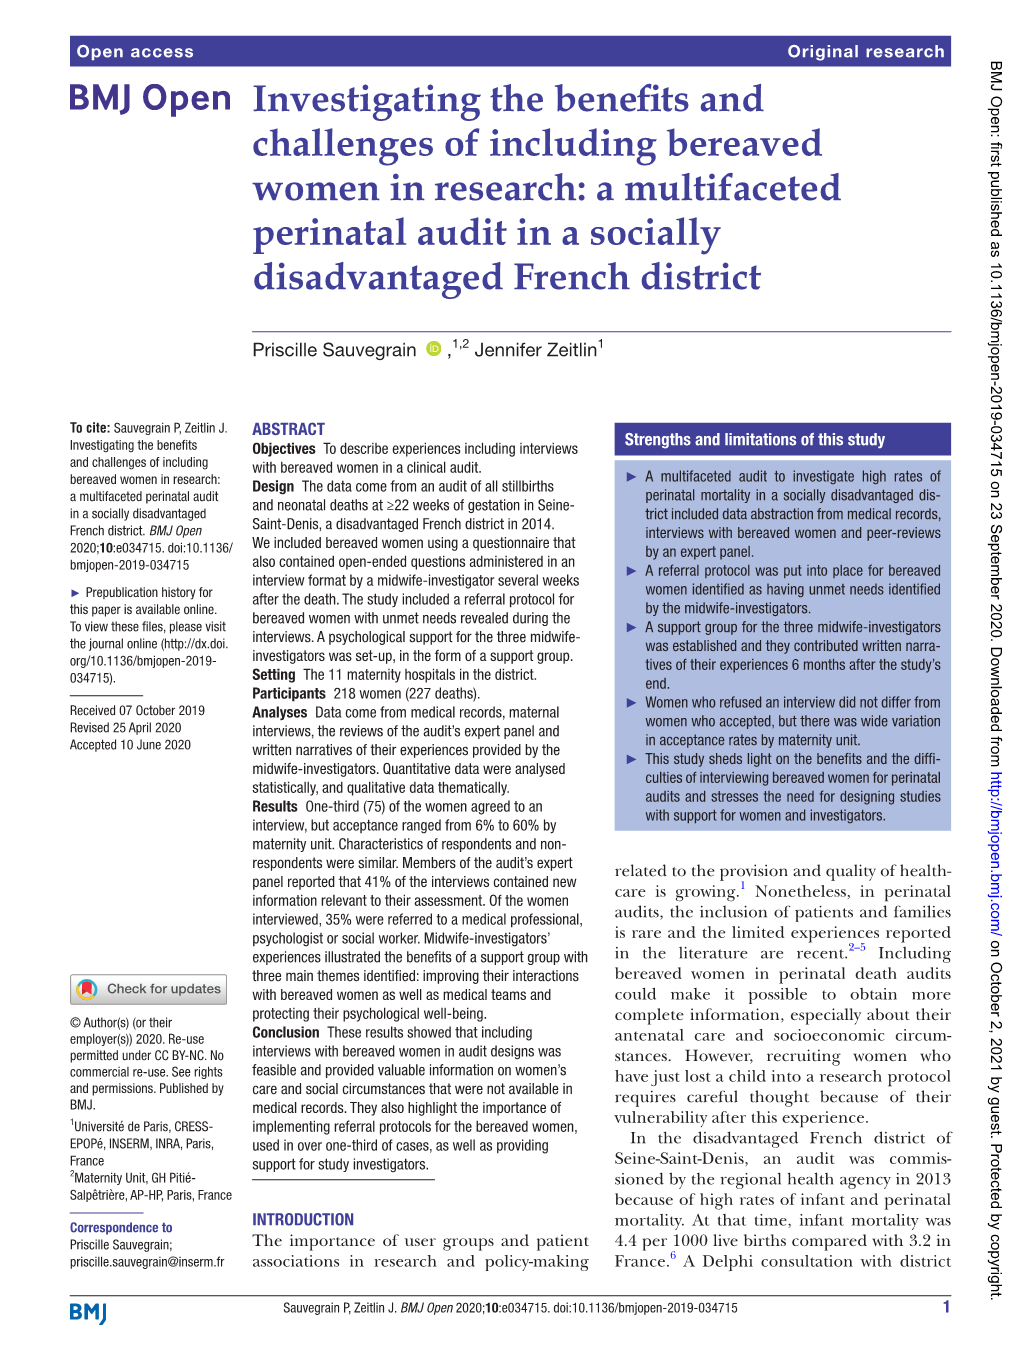 Investigating the Benefits and Challenges of Including Bereaved Women in Research: a Multifaceted Perinatal Audit in a Socially Disadvantaged French District